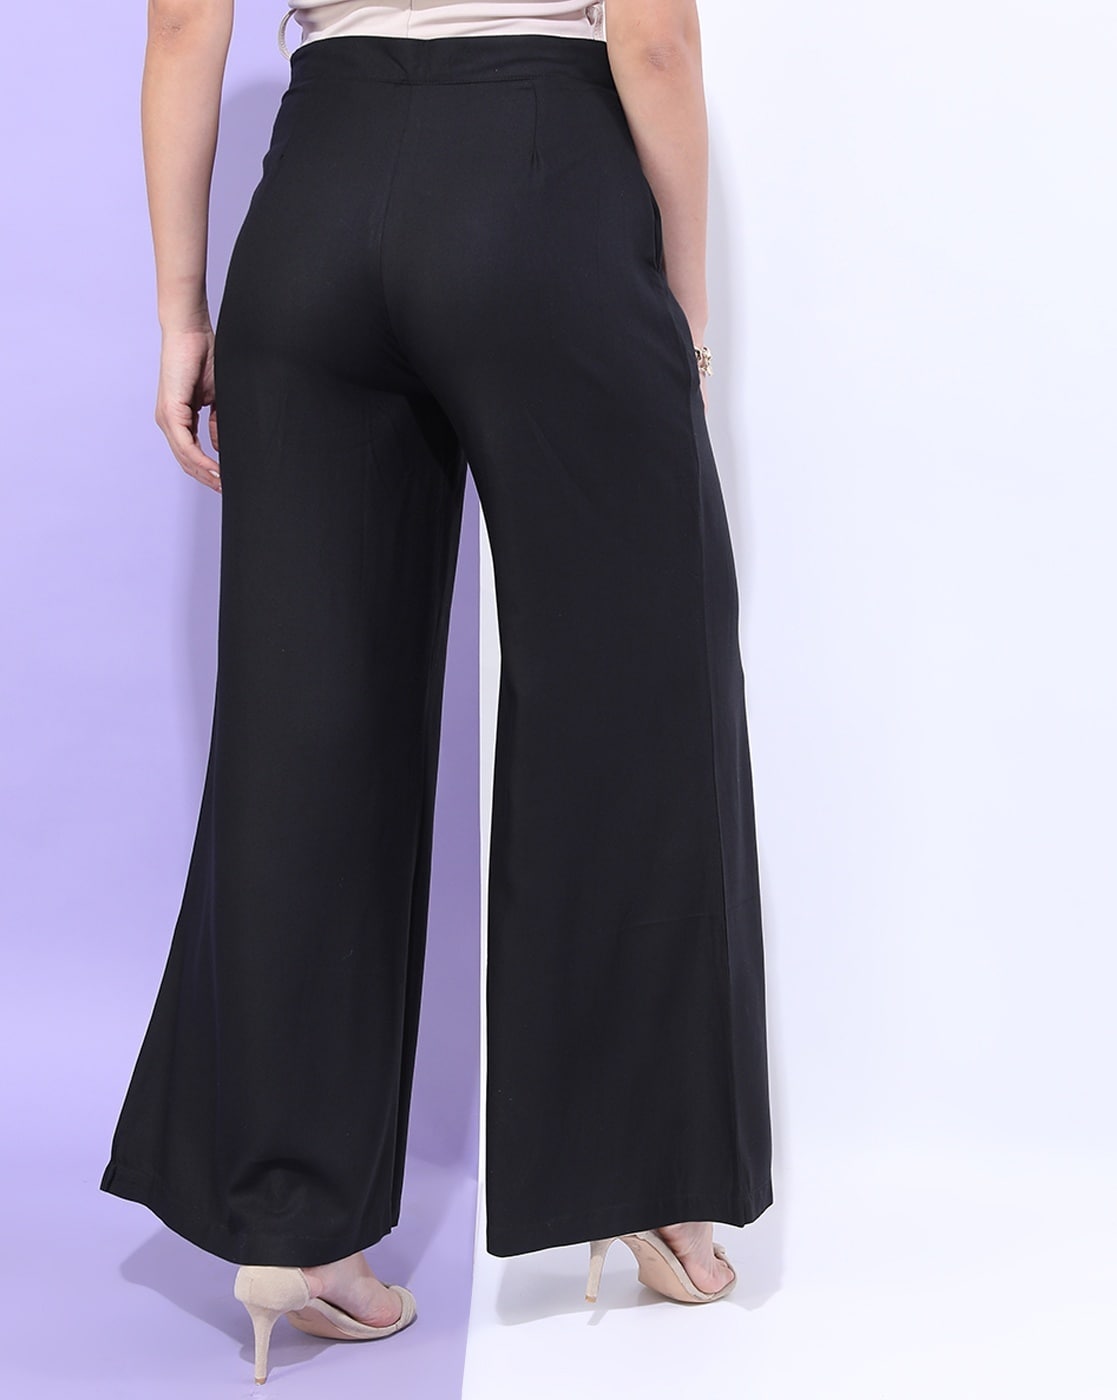 Black Pleated Palazzo High Waist Formal Pants For Women Casual Autumn Work  Wear With Wide Leg Capris, Floor Length And Loose Fit For Office Wear From  Blossommg, $21.77 | DHgate.Com